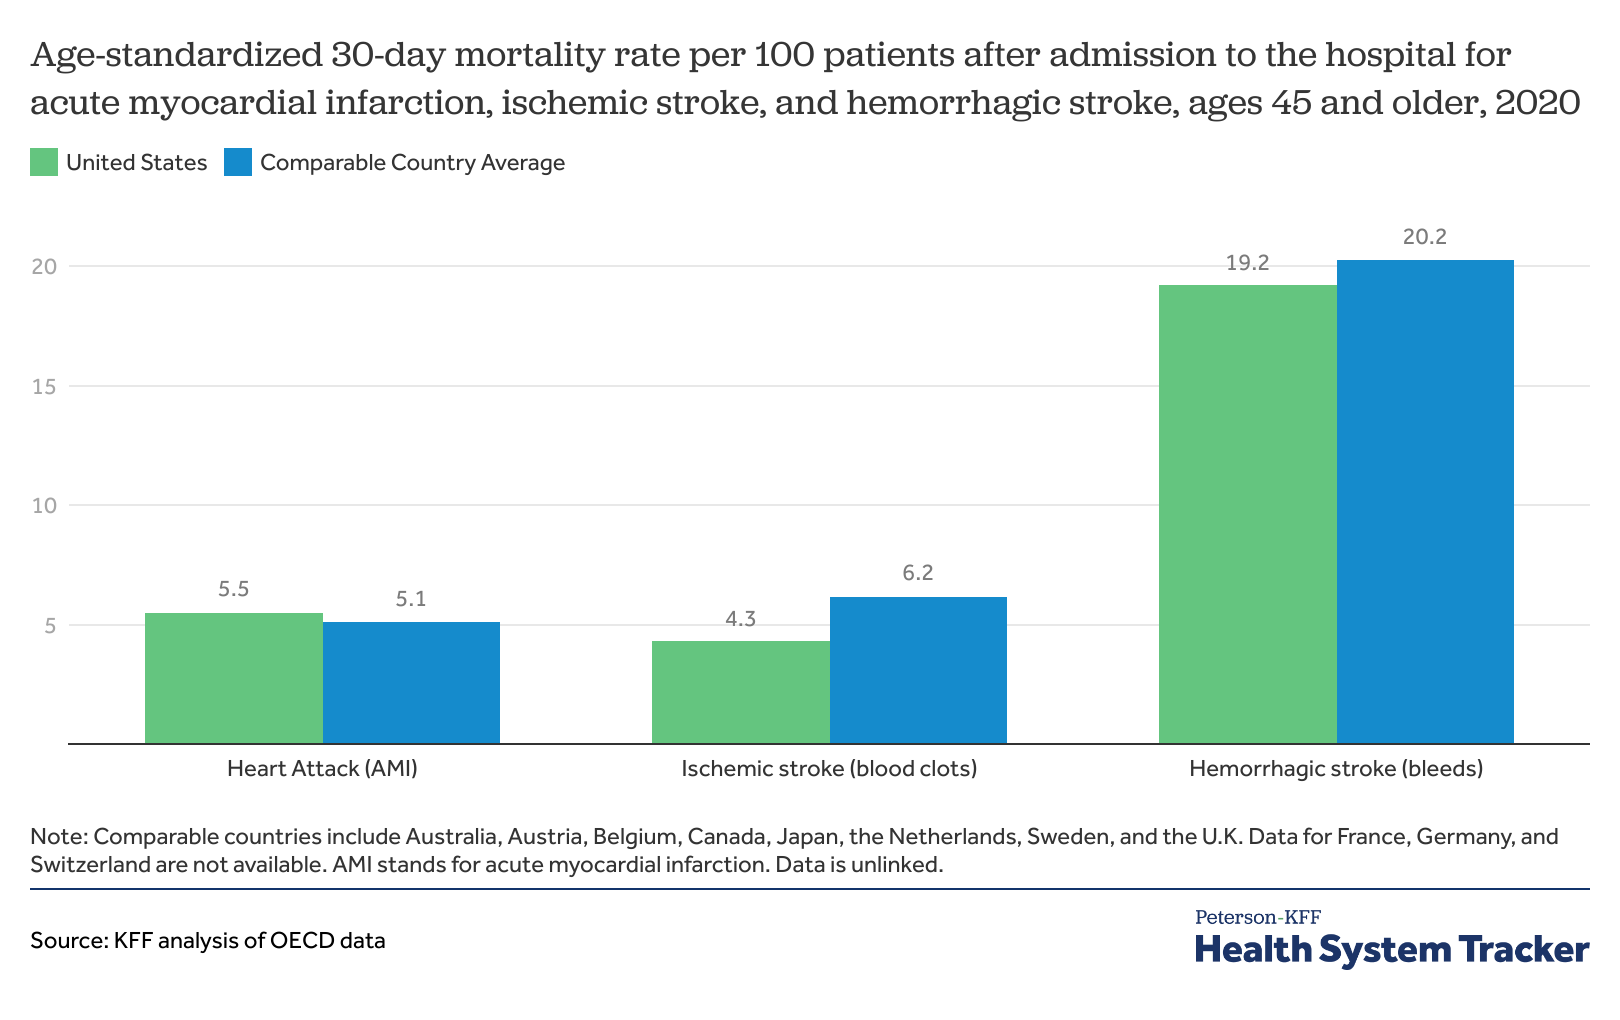 https://www.healthsystemtracker.org/wp-content/uploads/2023/10/age-standardized-30-day-mortality-rate-per-100-patients-after-admission-to-the-hospital-for-acute-myocardial-infarction-ischemic-stroke-and-hemorrhagic-stroke-ages-45-and-older-2020-.png